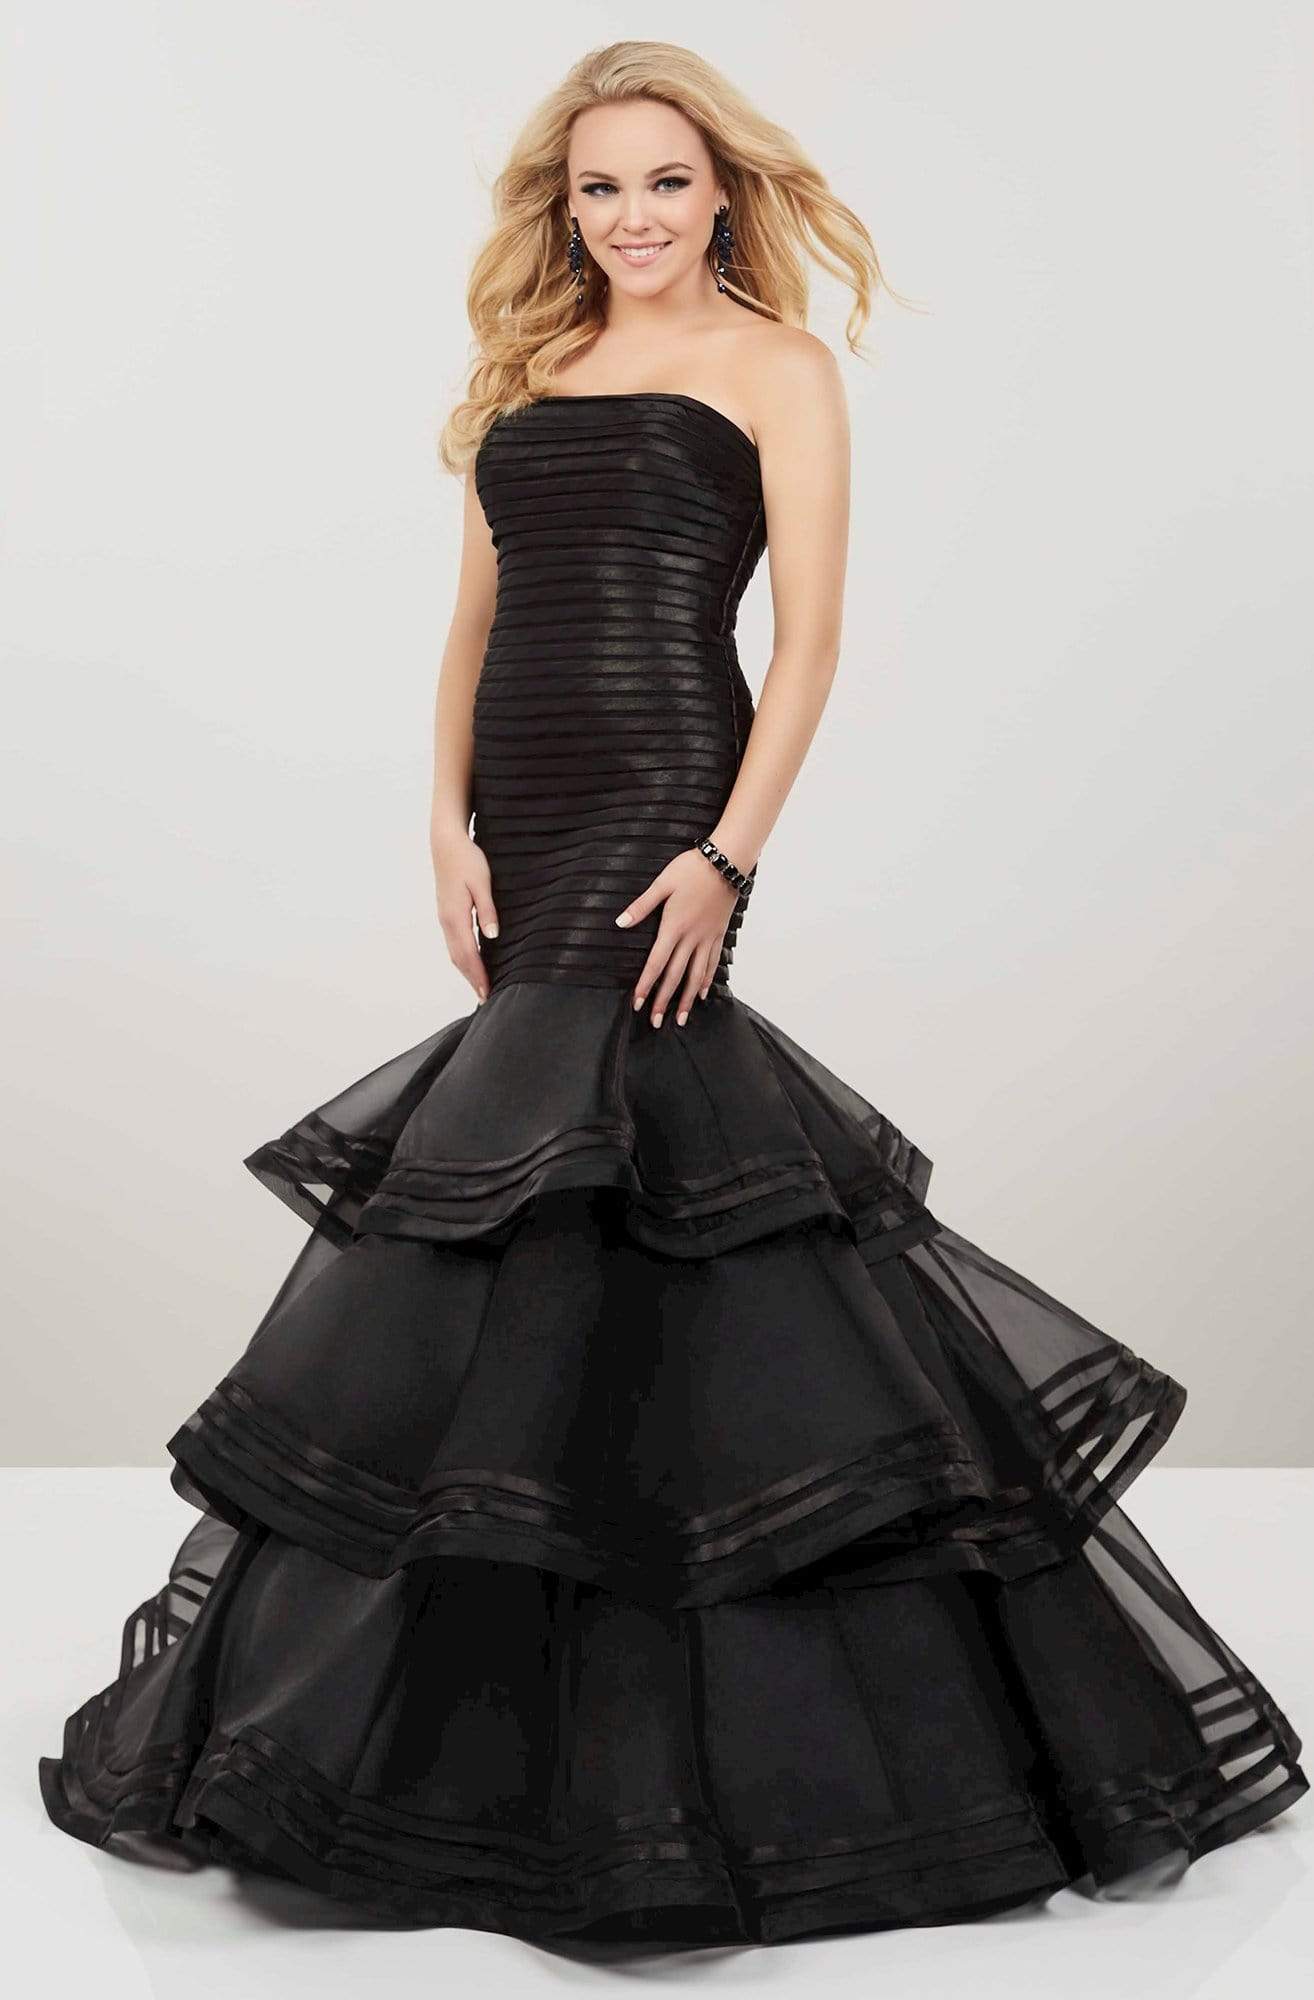 Panoply - 14953 Strapless Ruched Layered Mermaid Dress Special Occasion Dress 0 / Black